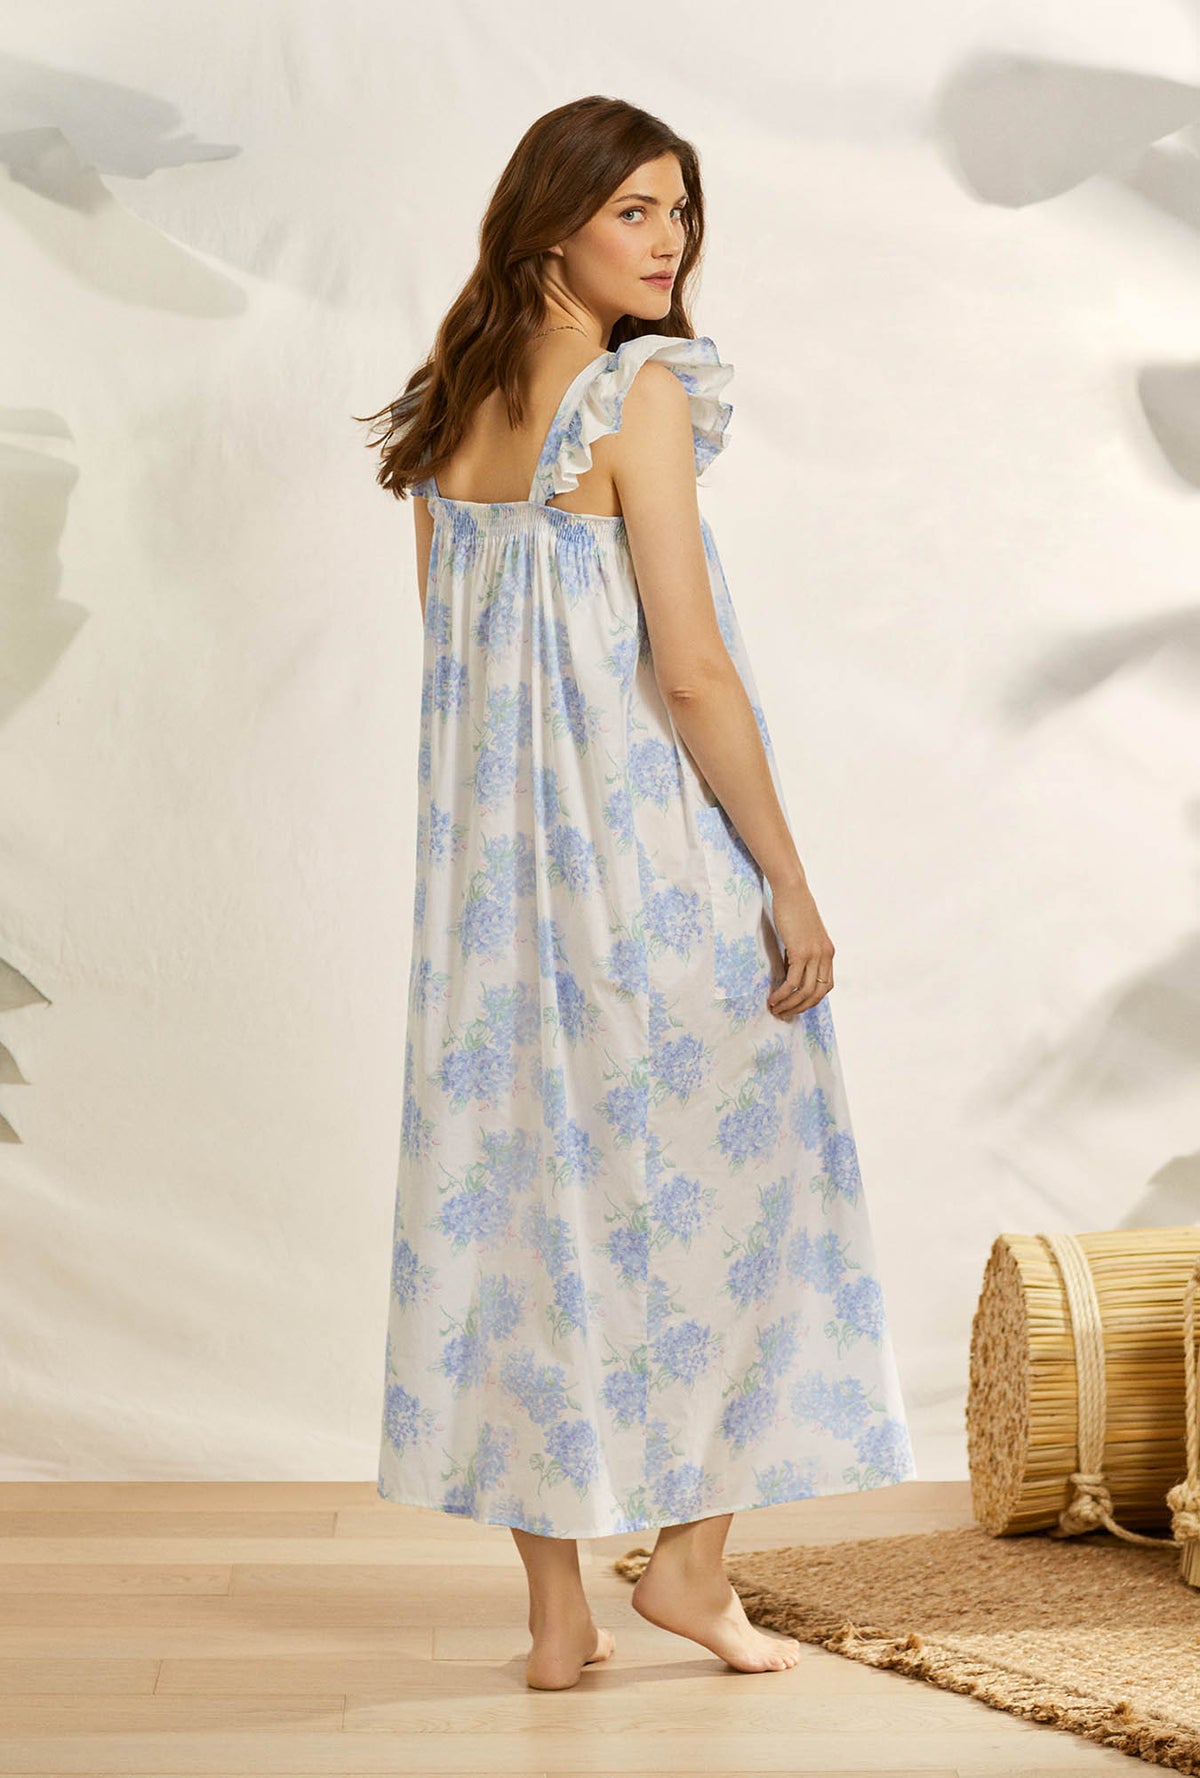 A lady wearing white butterfly sleeve angeline nightgown with hydrangea blossom print.